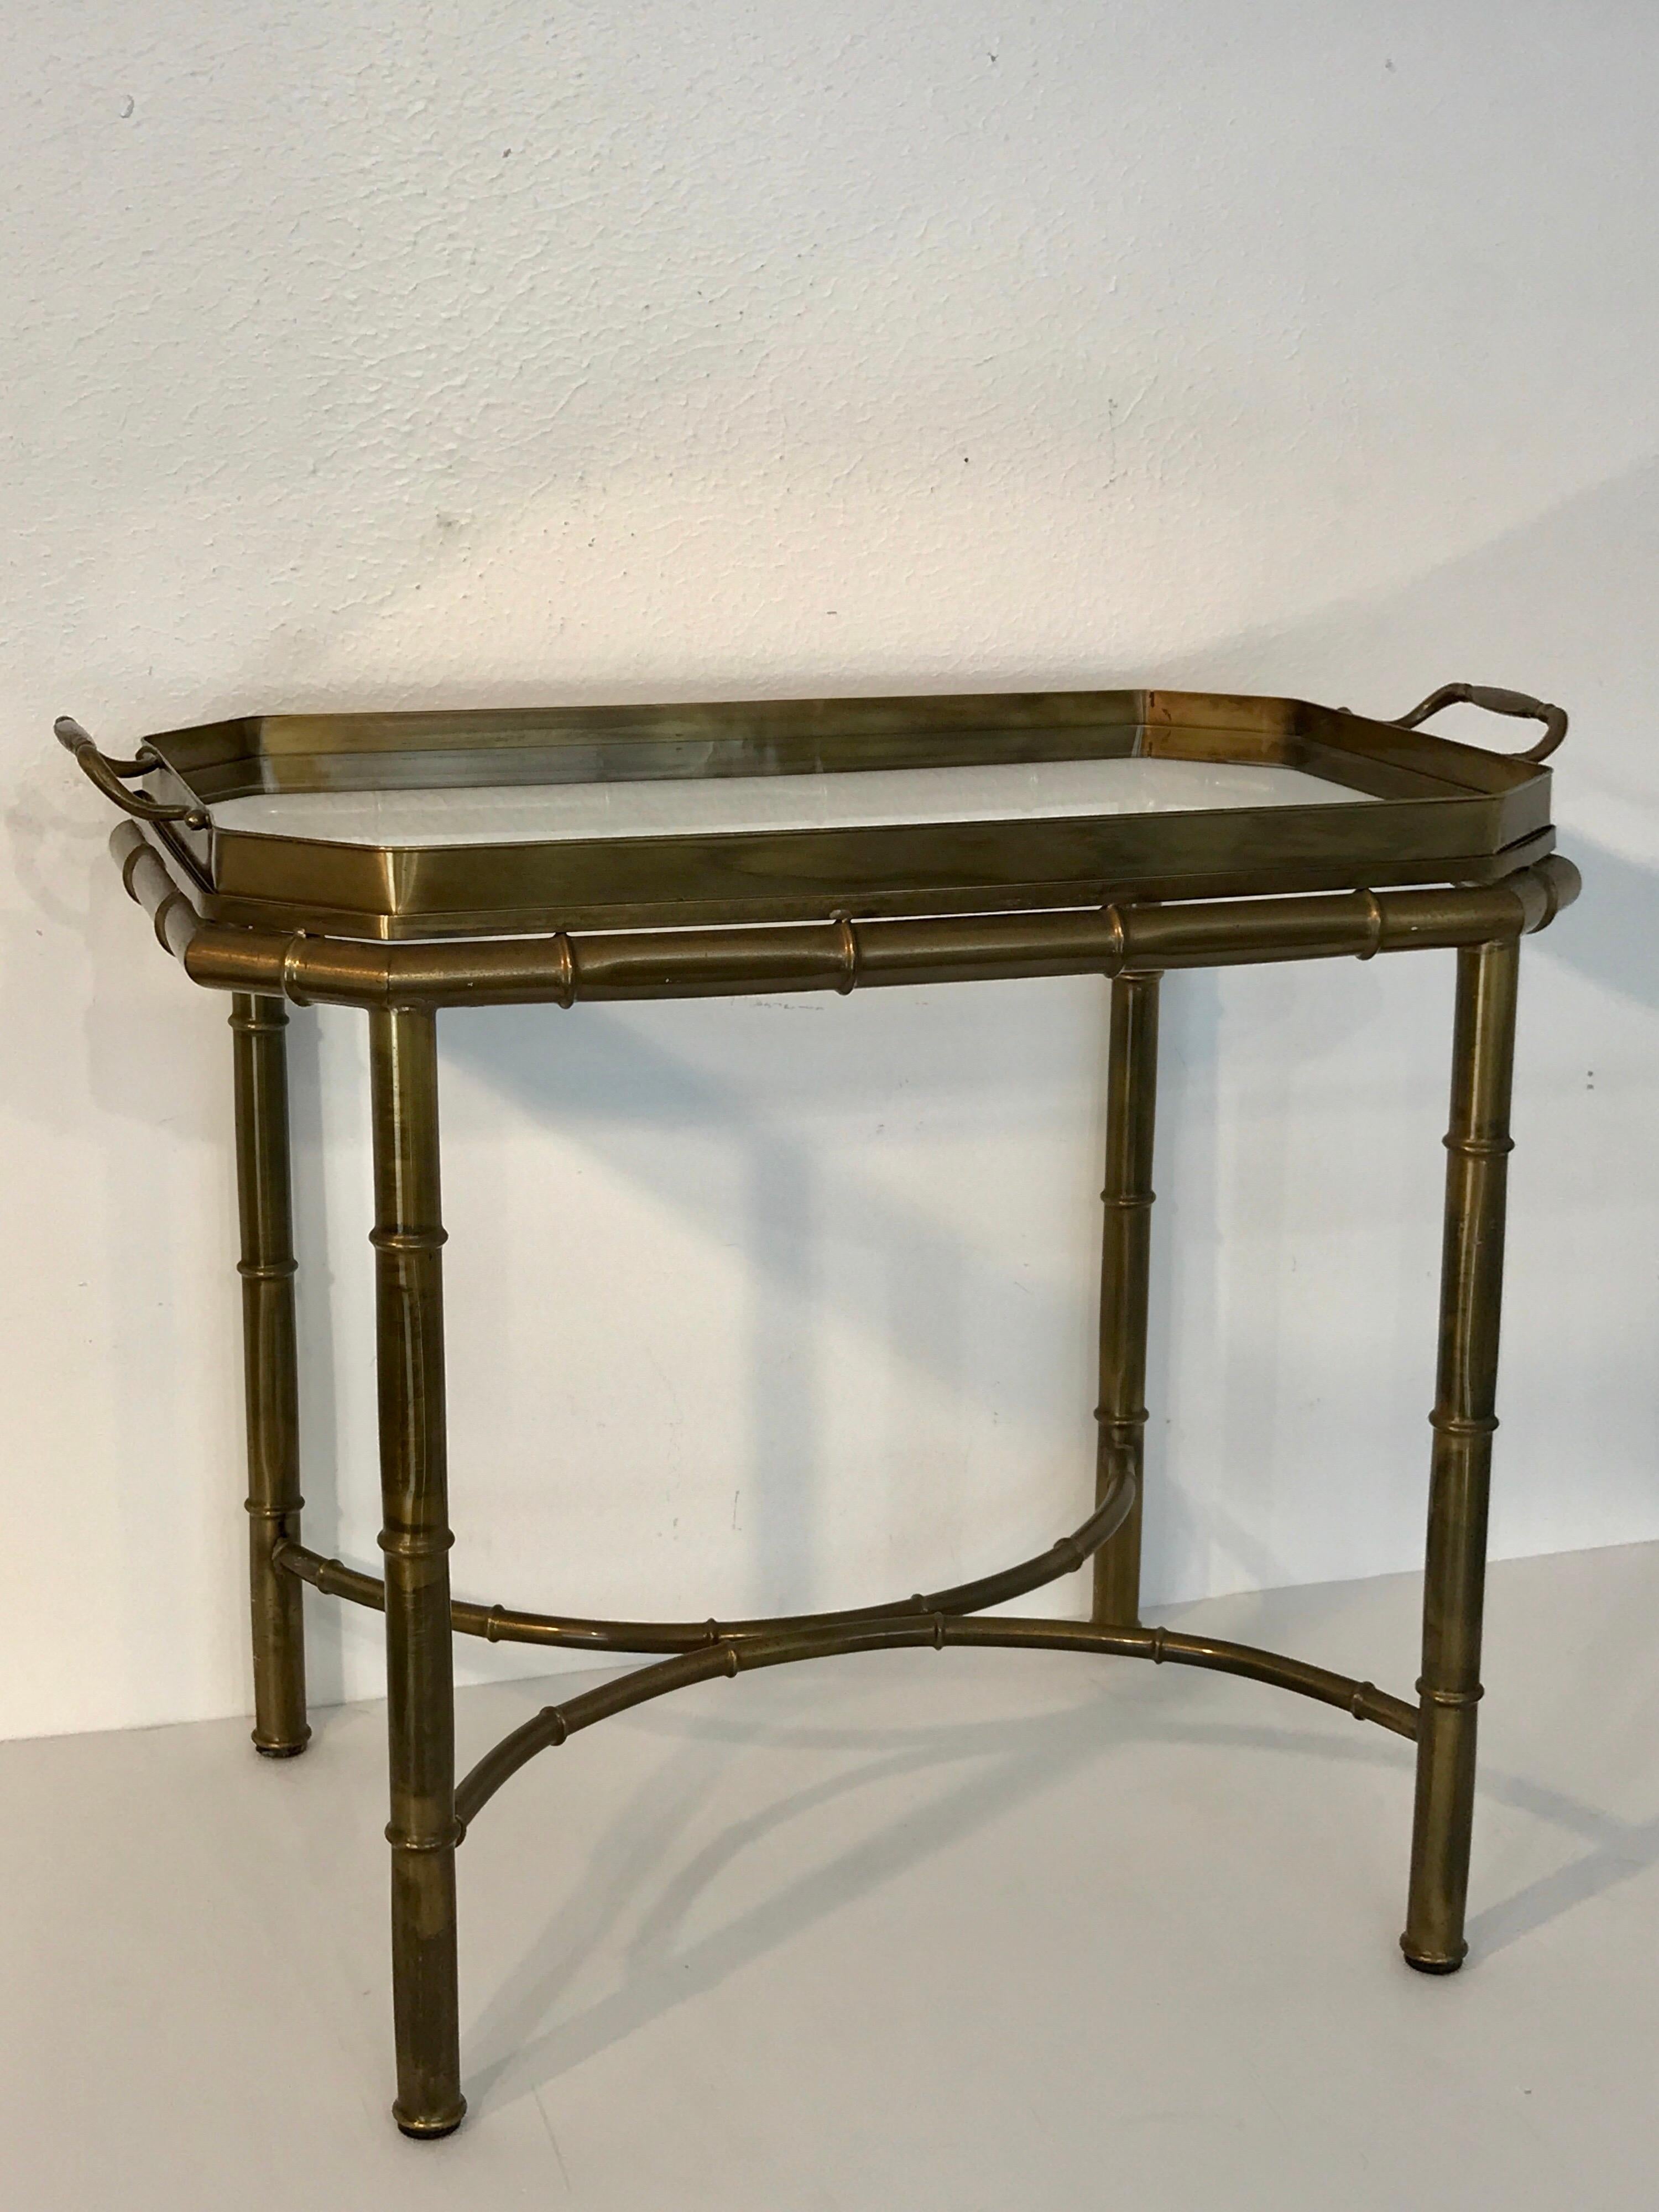 Mid-Century Modern Faux Bois Campaign Style Patinated Brass Tray Table, by Mastercraft For Sale